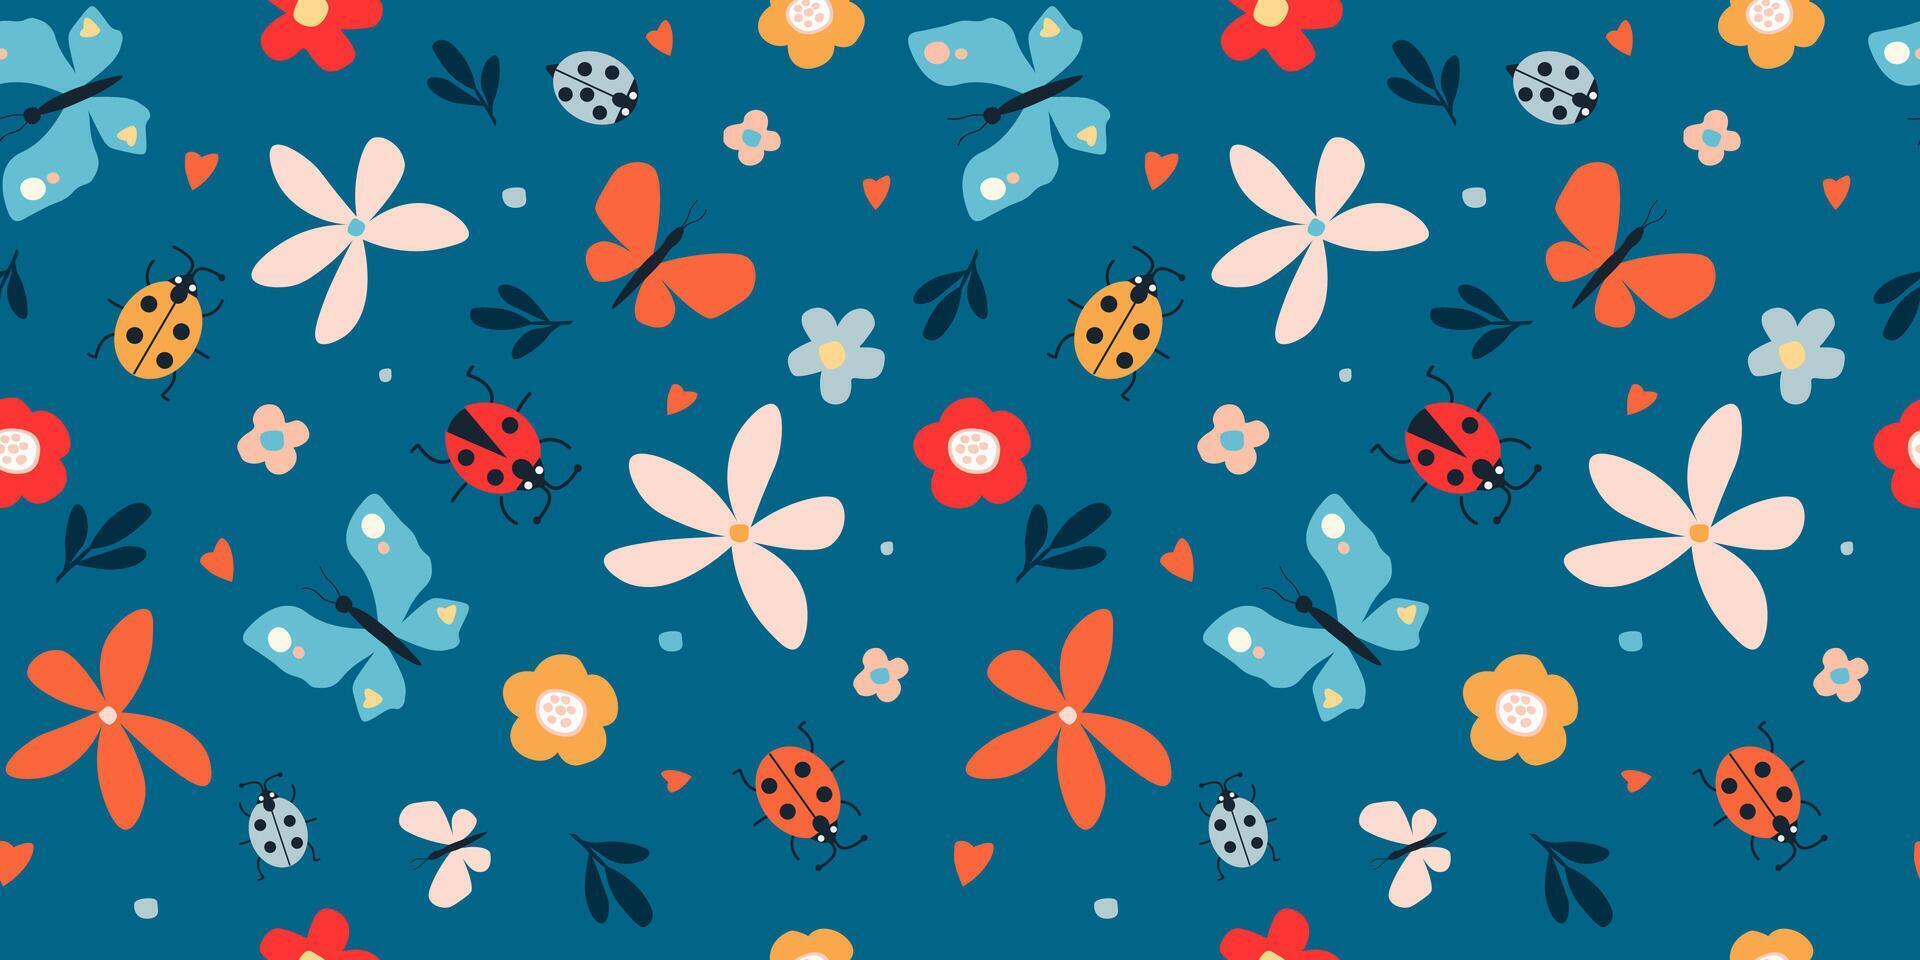 Seamless pattern with summer cute abstract hand drawn pattern. Butterflies, flowers, ladybugs, leaves on the print. Vector graphics.